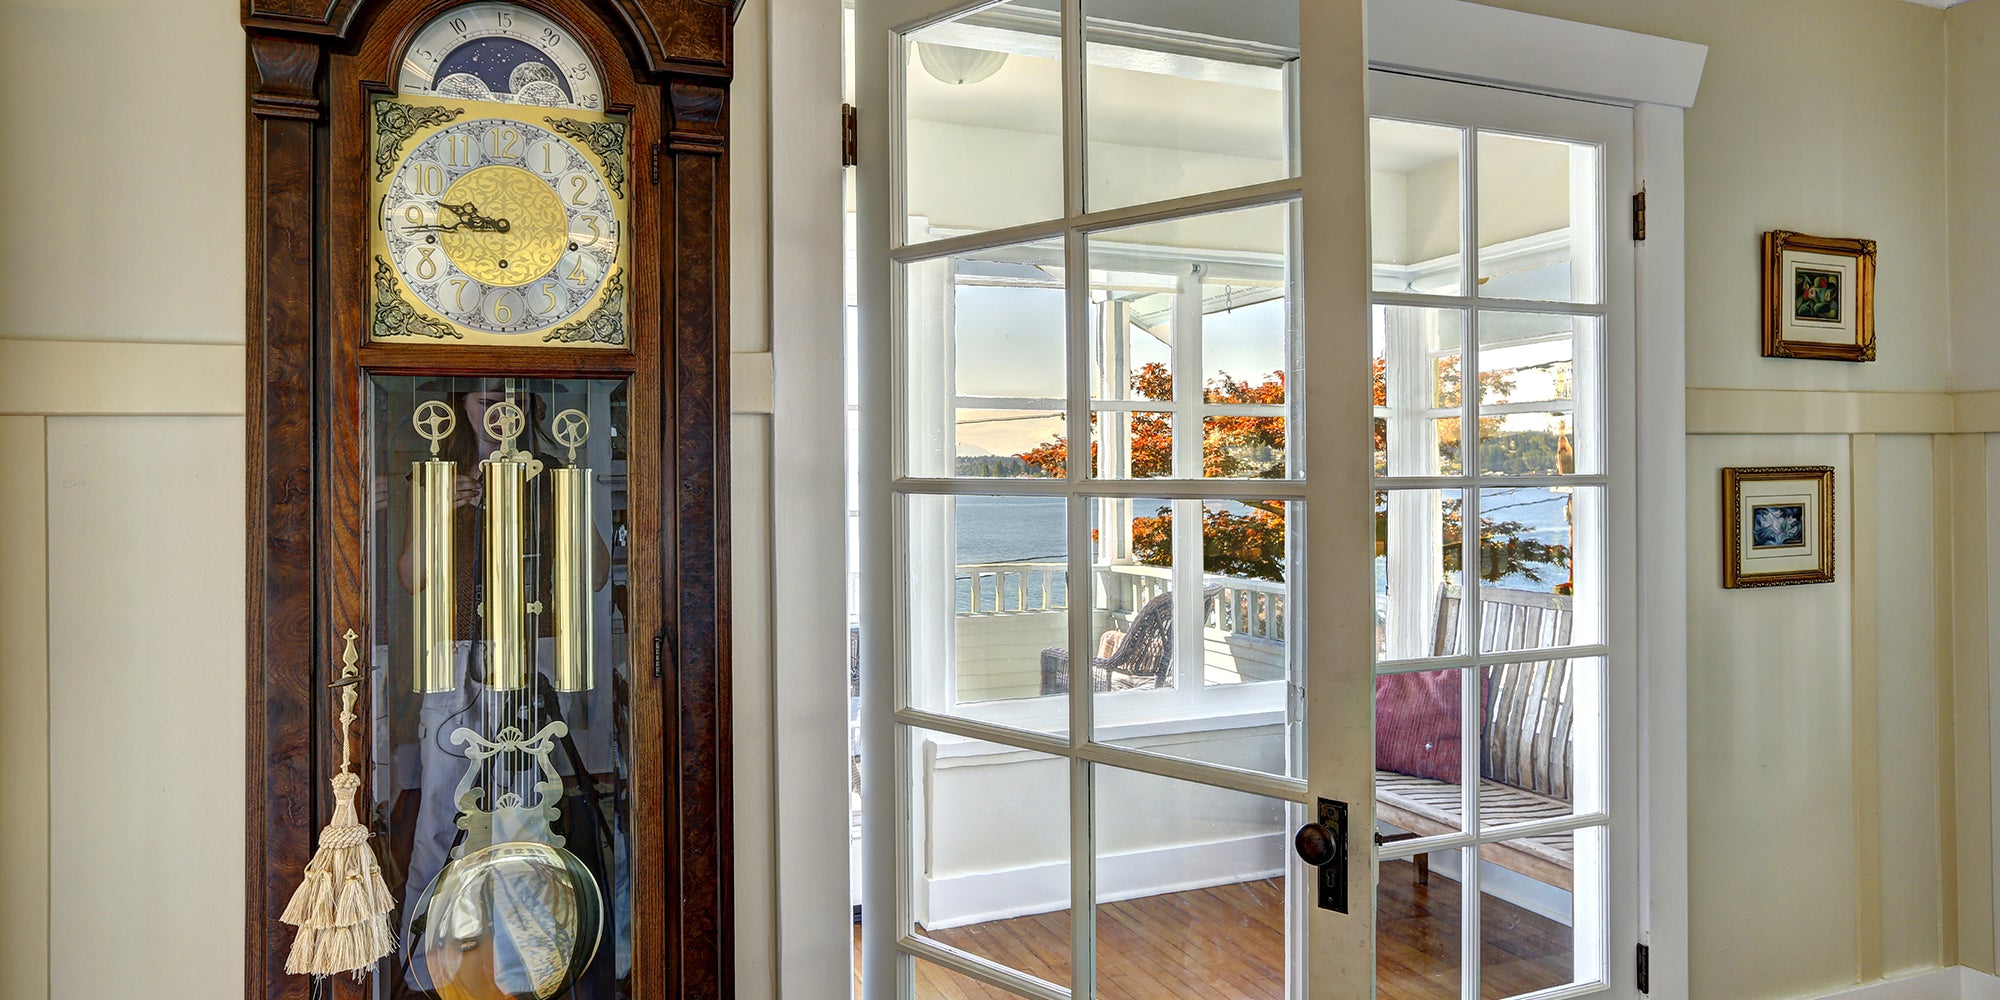 What Is a Triple Chime Grandfather Clock? - Premier Clocks